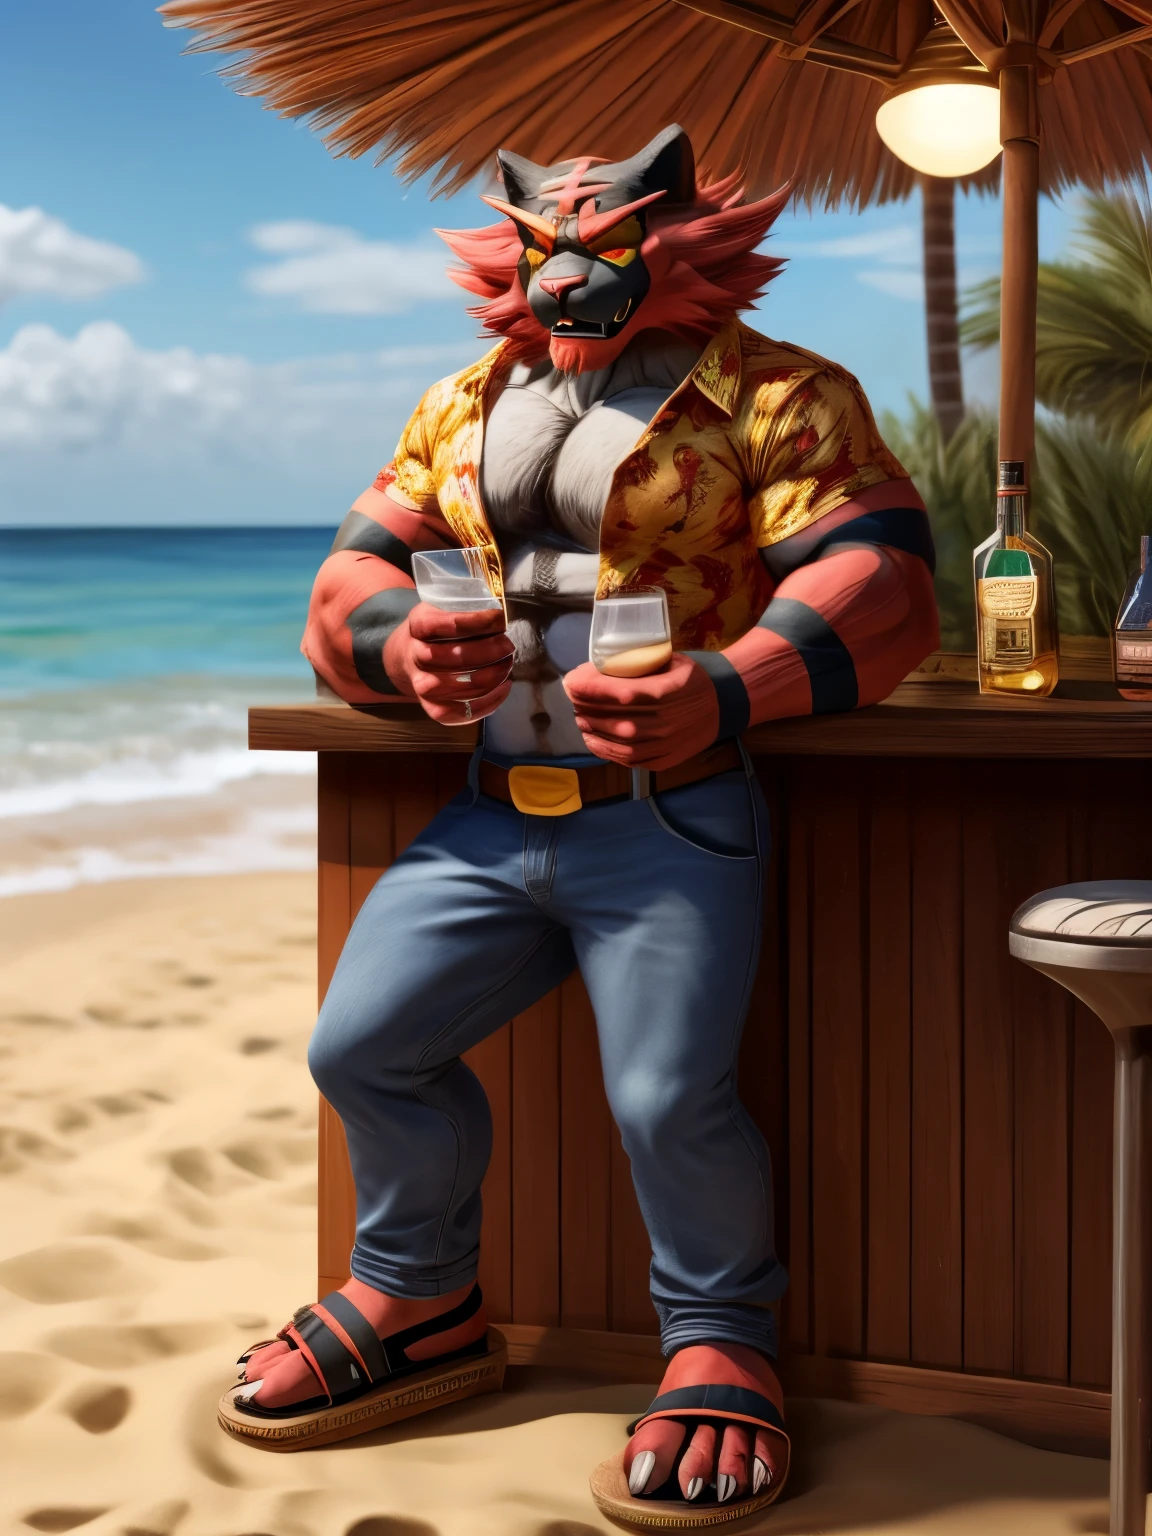 A visually descriptive and detailed rendering of a himbo barefoot Incineroar, full figure, in a yellow Hawaiian shirt and long jeans, nice big feet paws with claws, wearing flip flops, drinks whiskey, drunk, sleepy, dark brown and gray and white fur, open footwear, sandals, beach bar